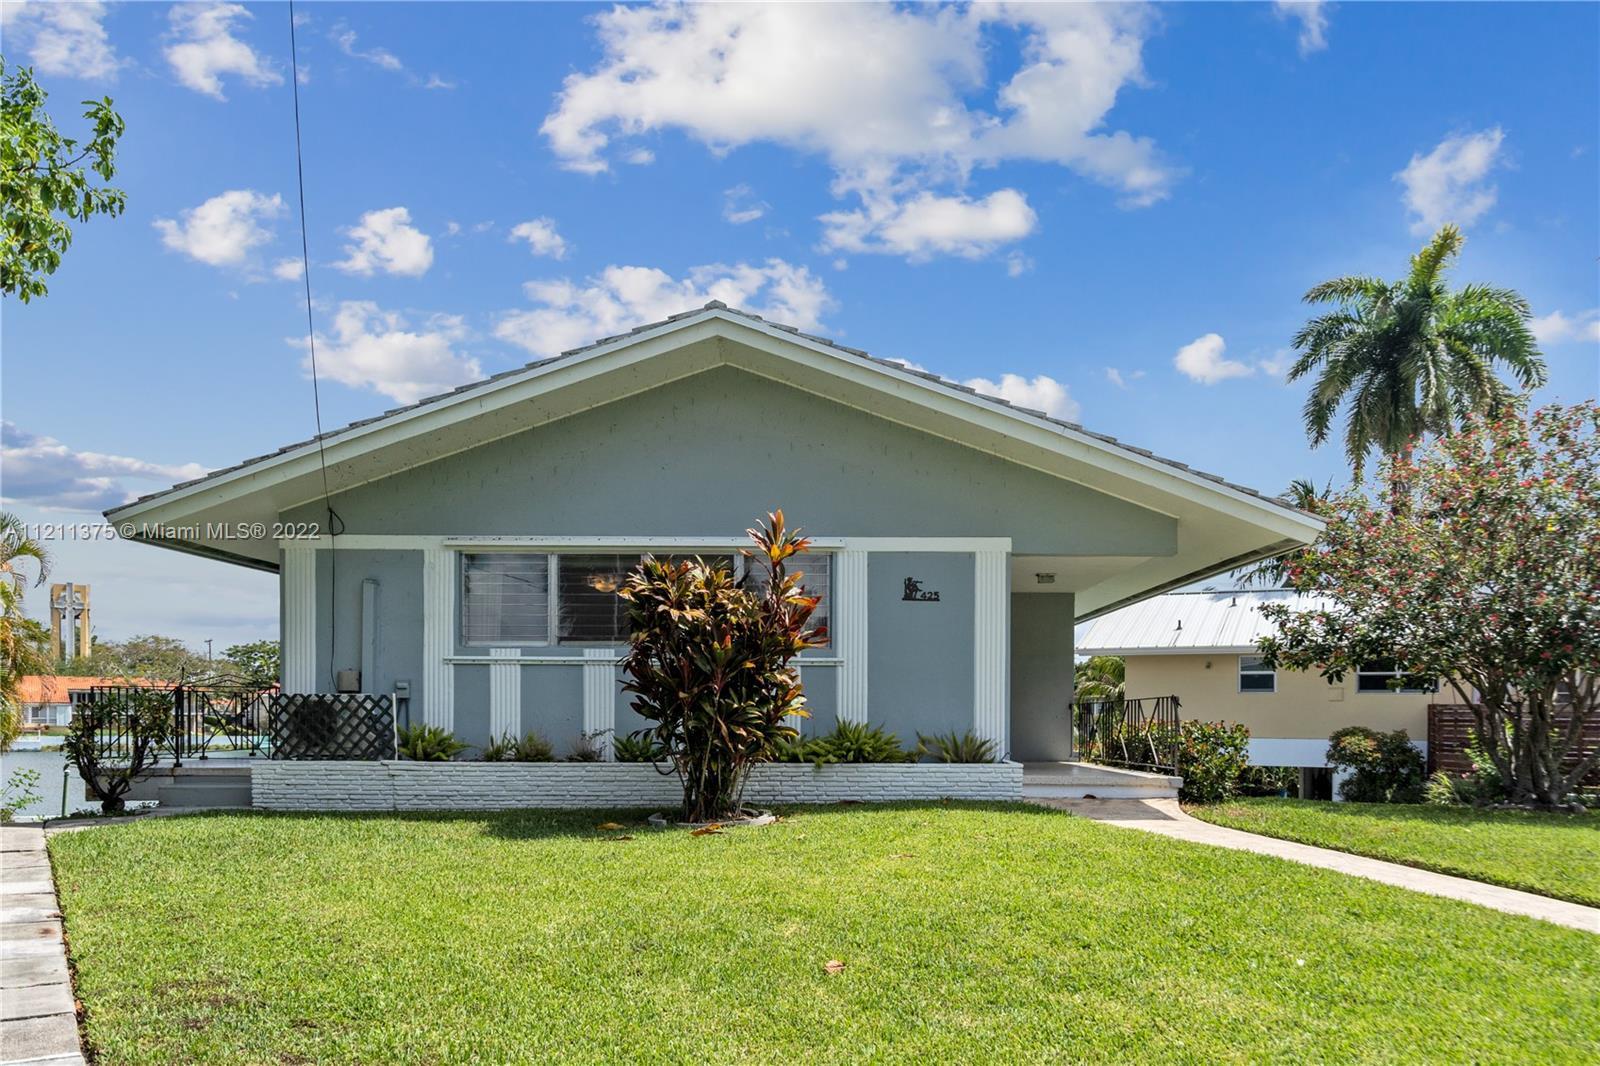 Miami Shores Lakefront home. Rare opportunity to find a Shores home under $1m on Mirror Lake. 1950’s